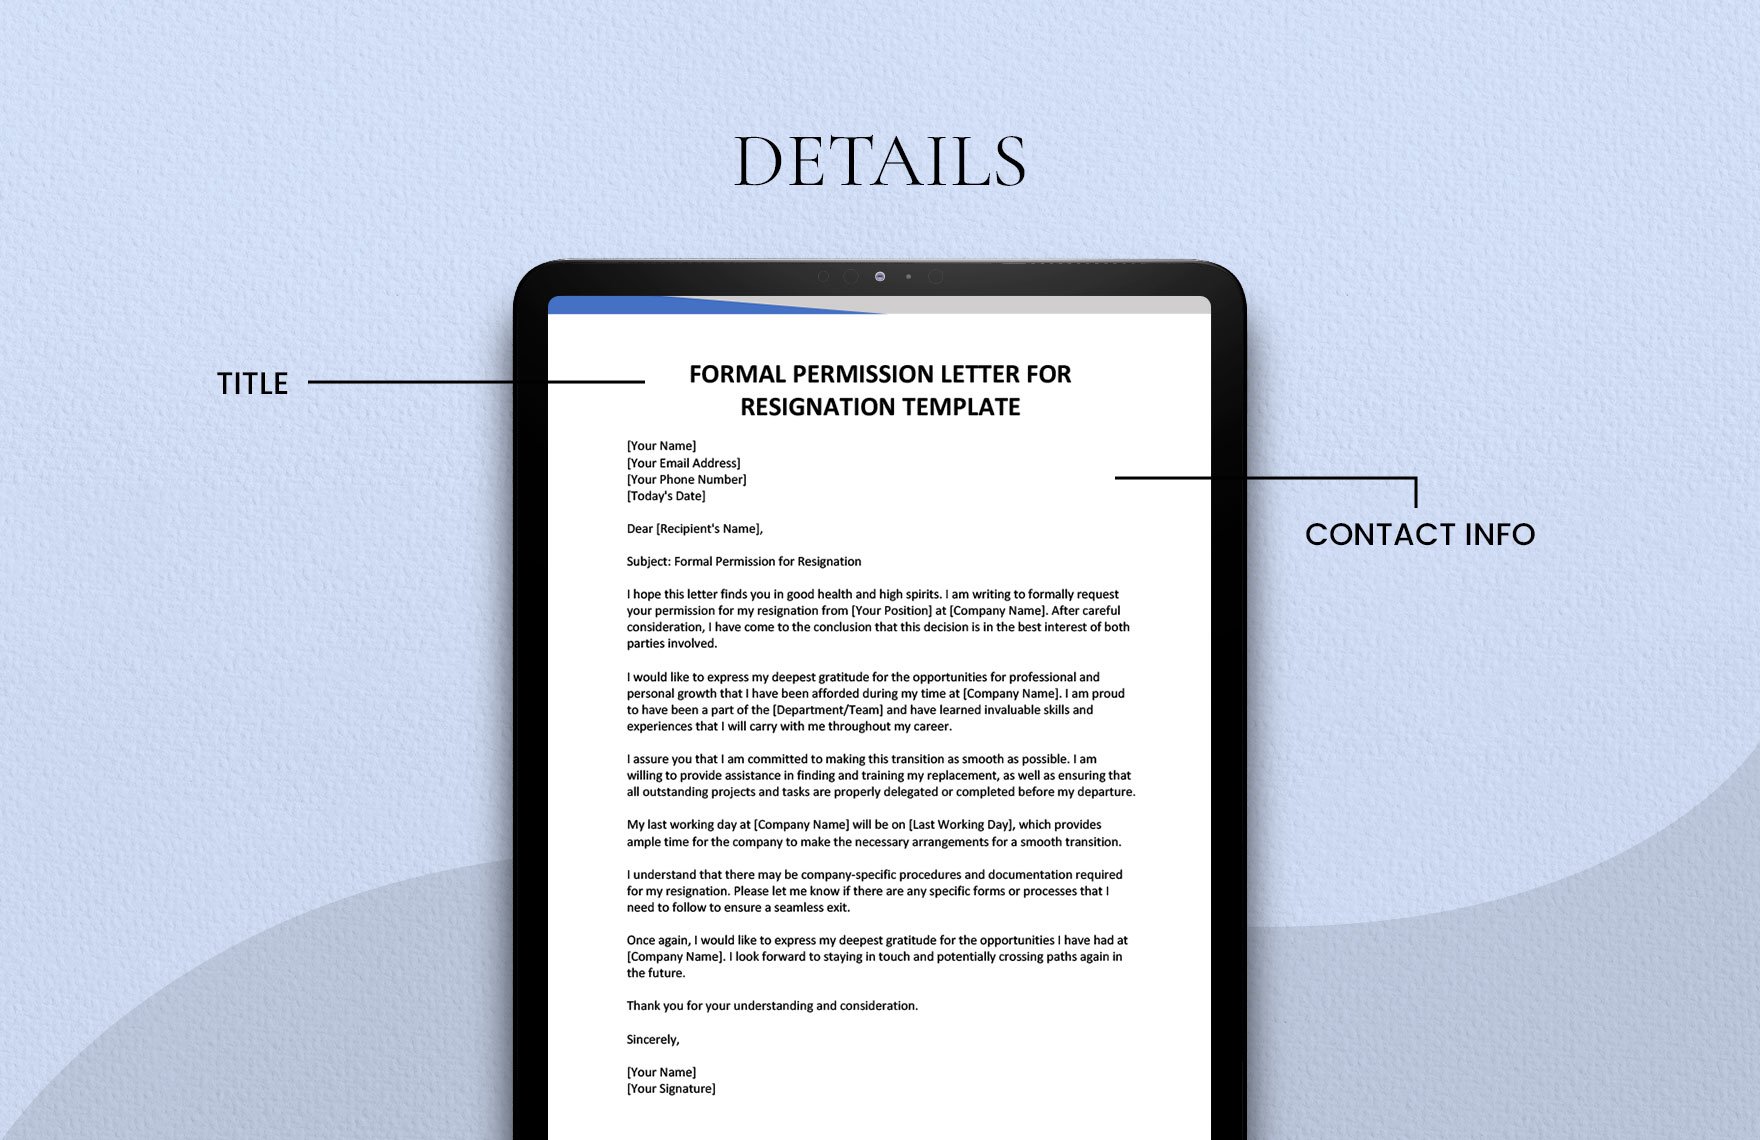 Formal Permission Letter for Resignation Template